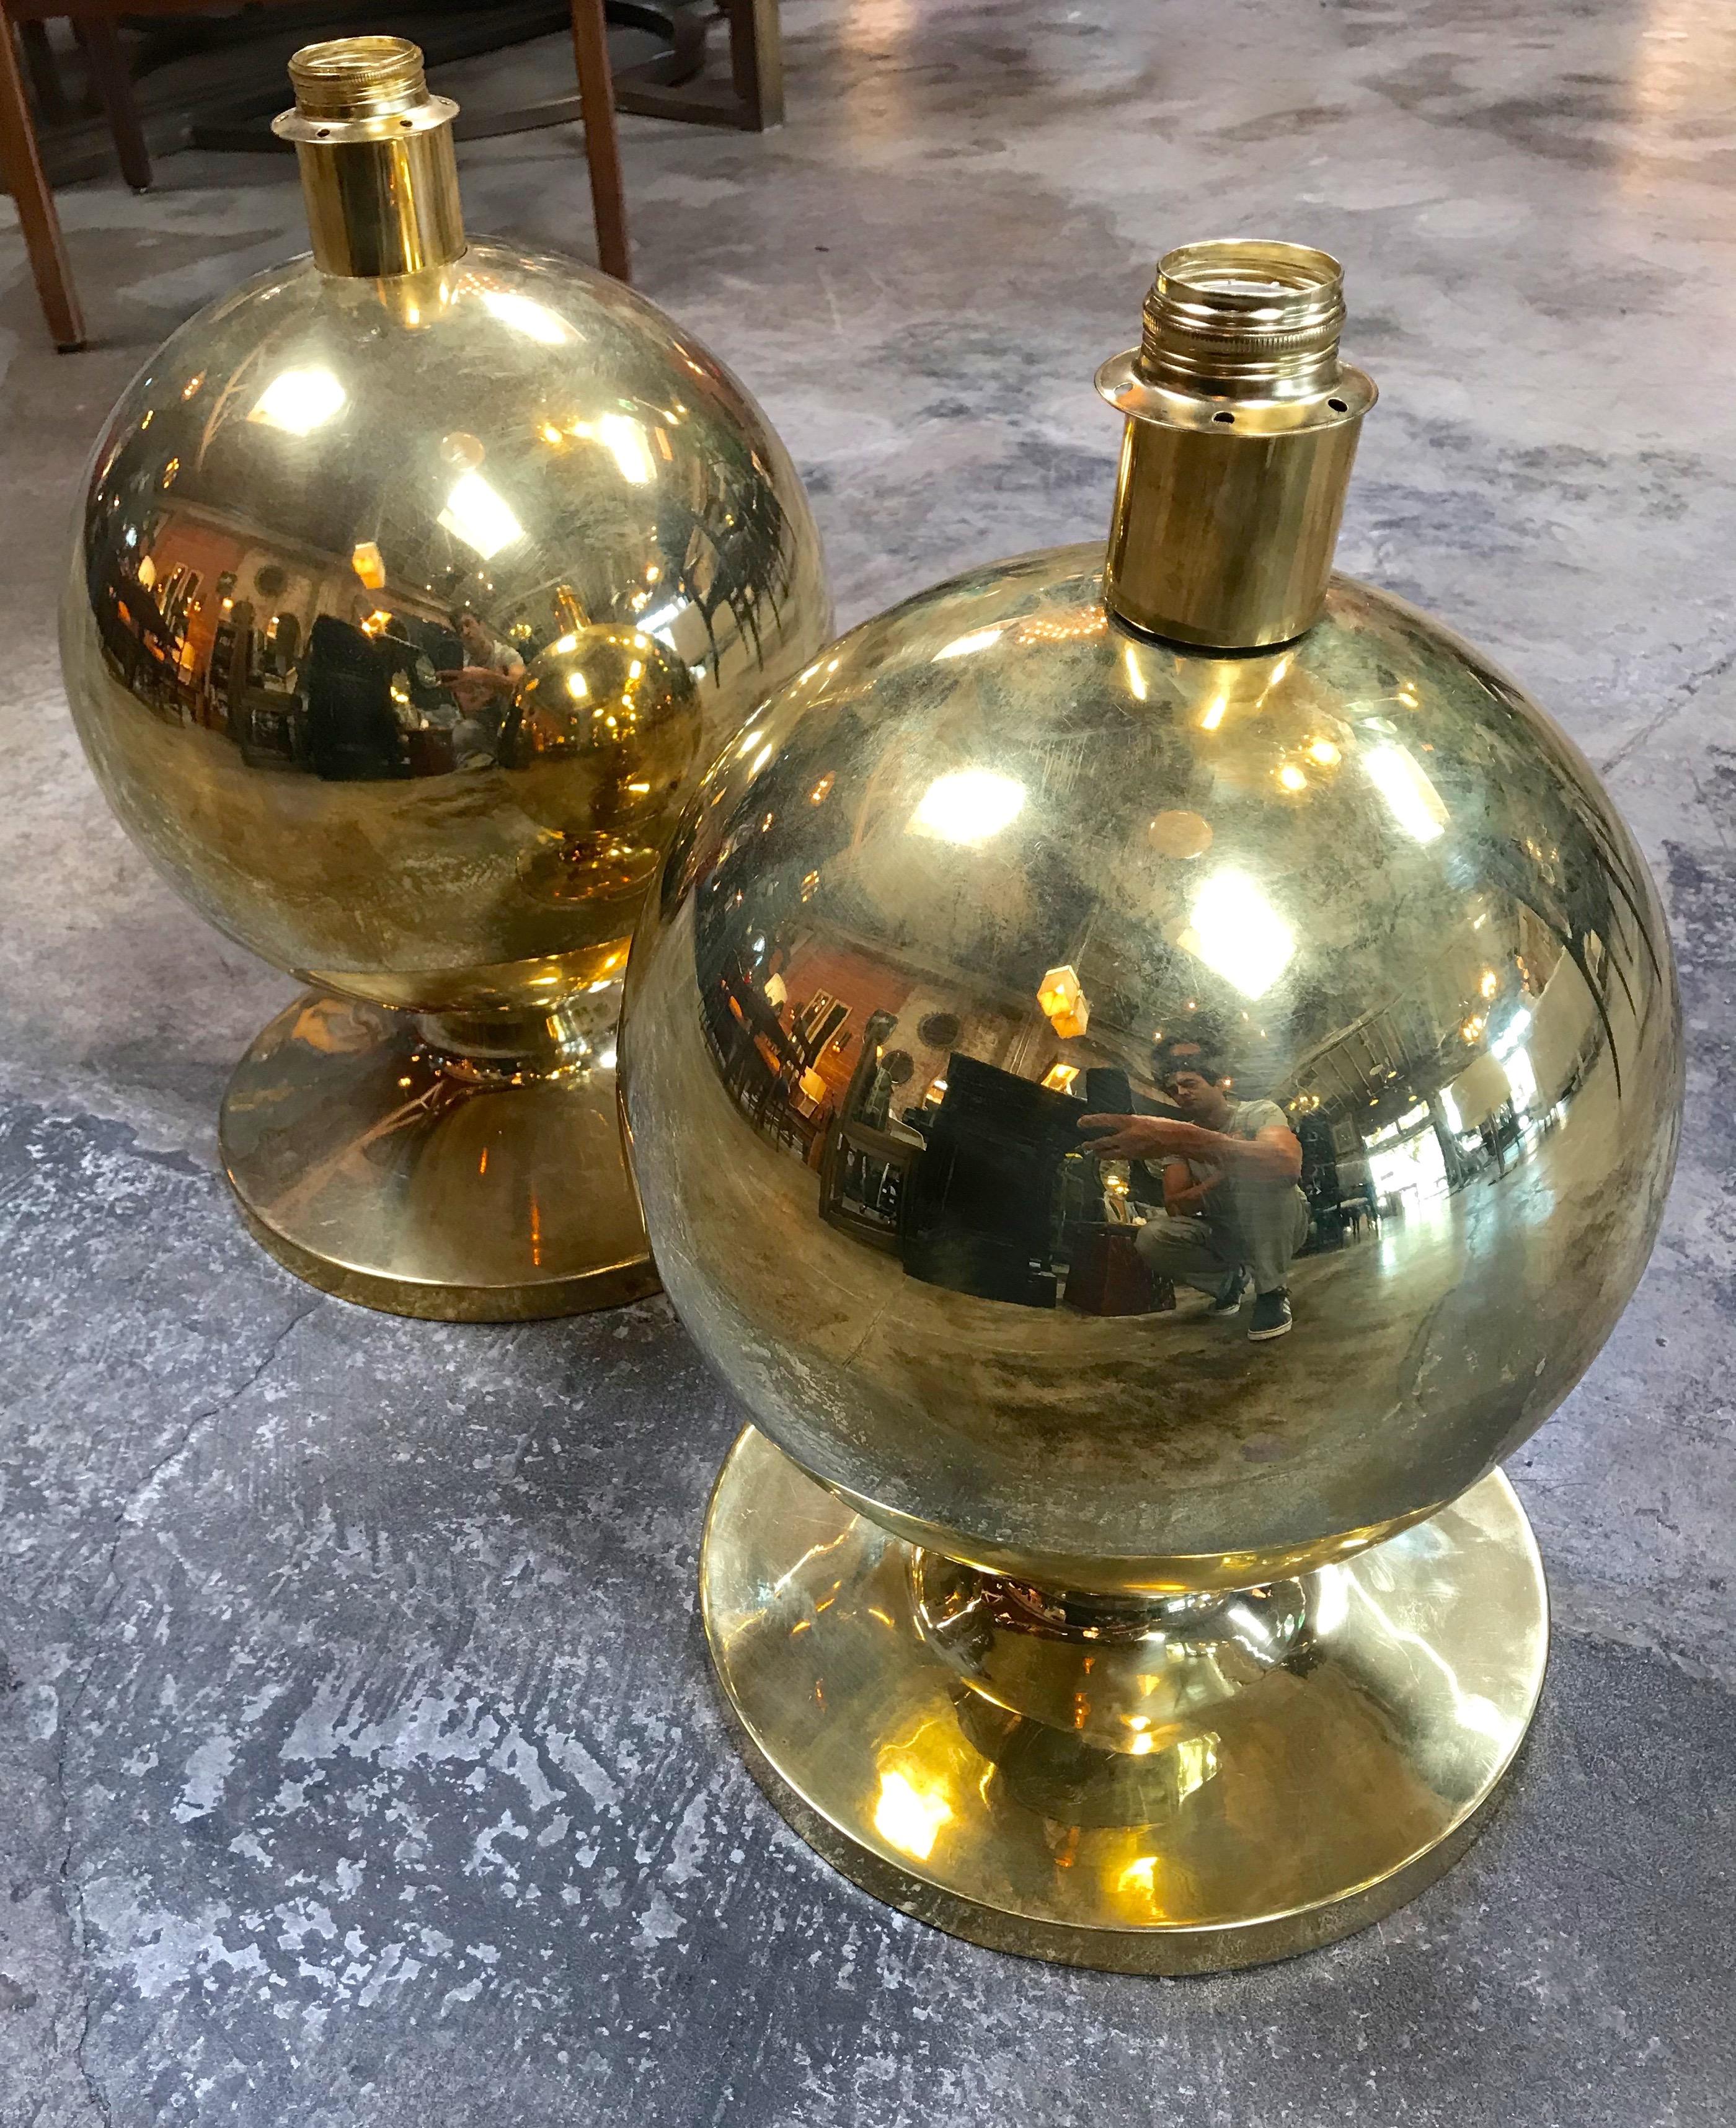 Pair of stunning Italian brass globe lamps, 1960s.
Lucite globes, polished brass.
Measures: Diameter of the globe: 11